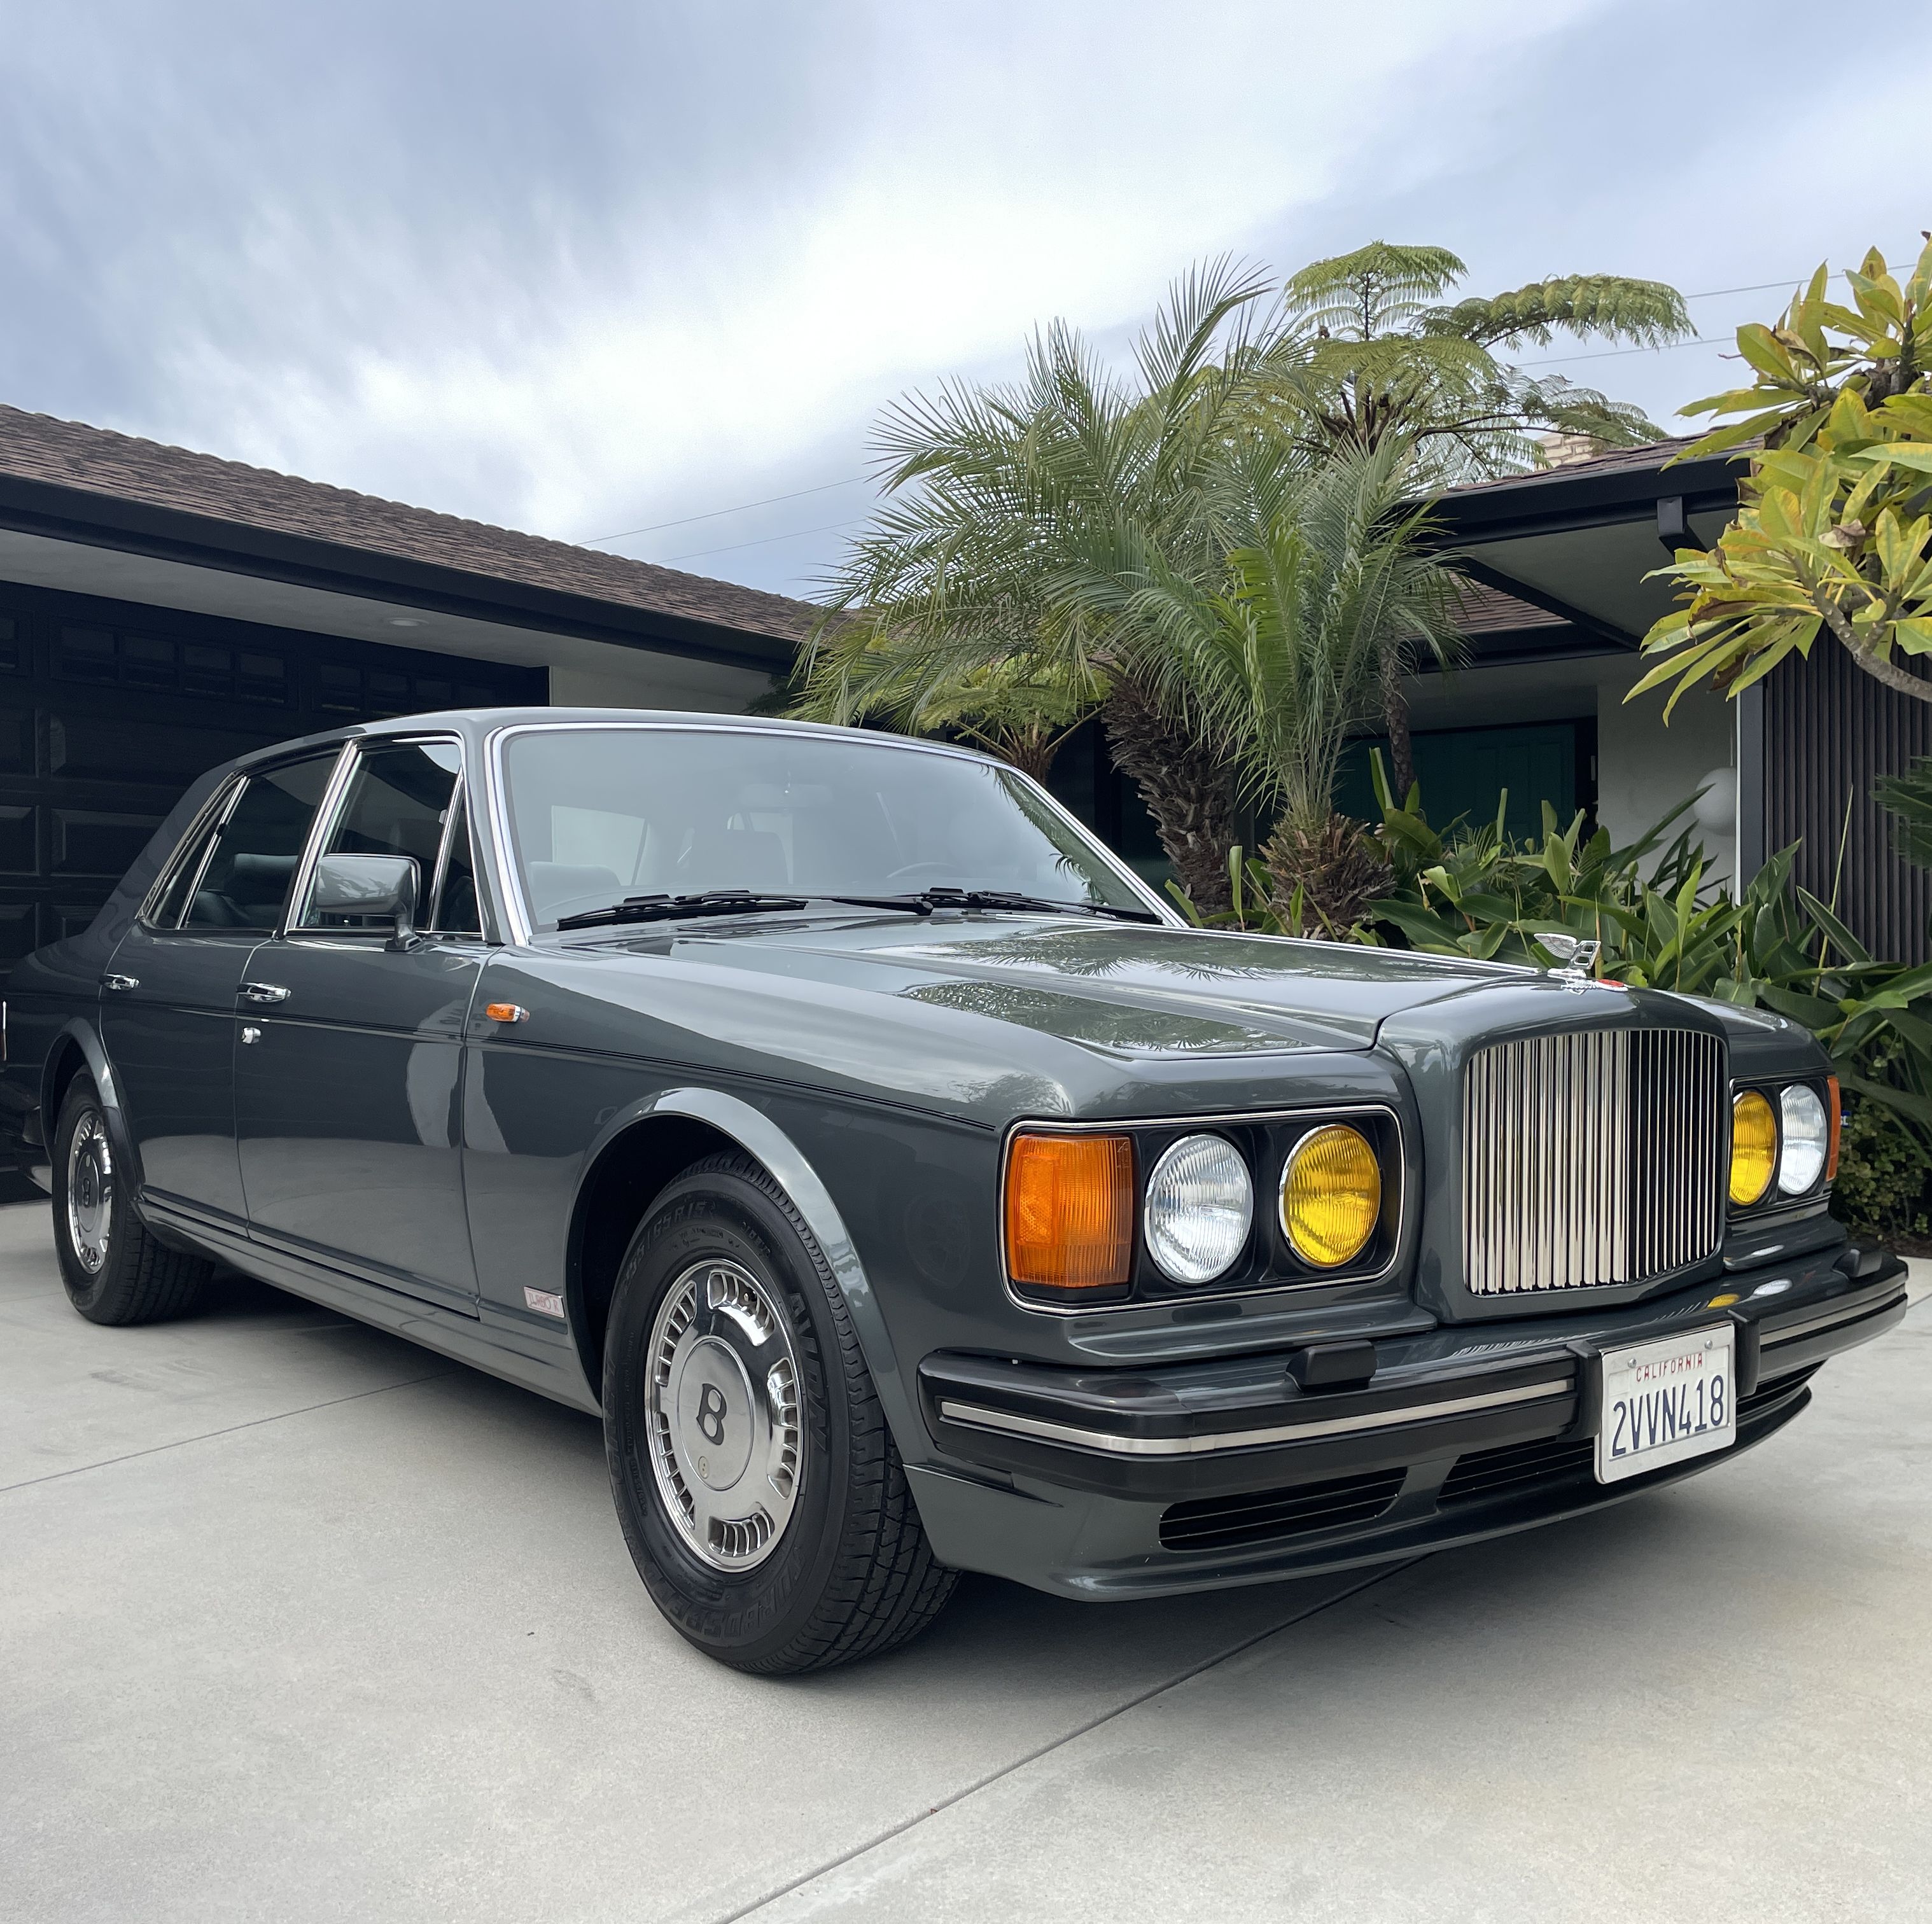 My 1991 Bentley Turbo R: Sometimes the Perfect Car Finds You